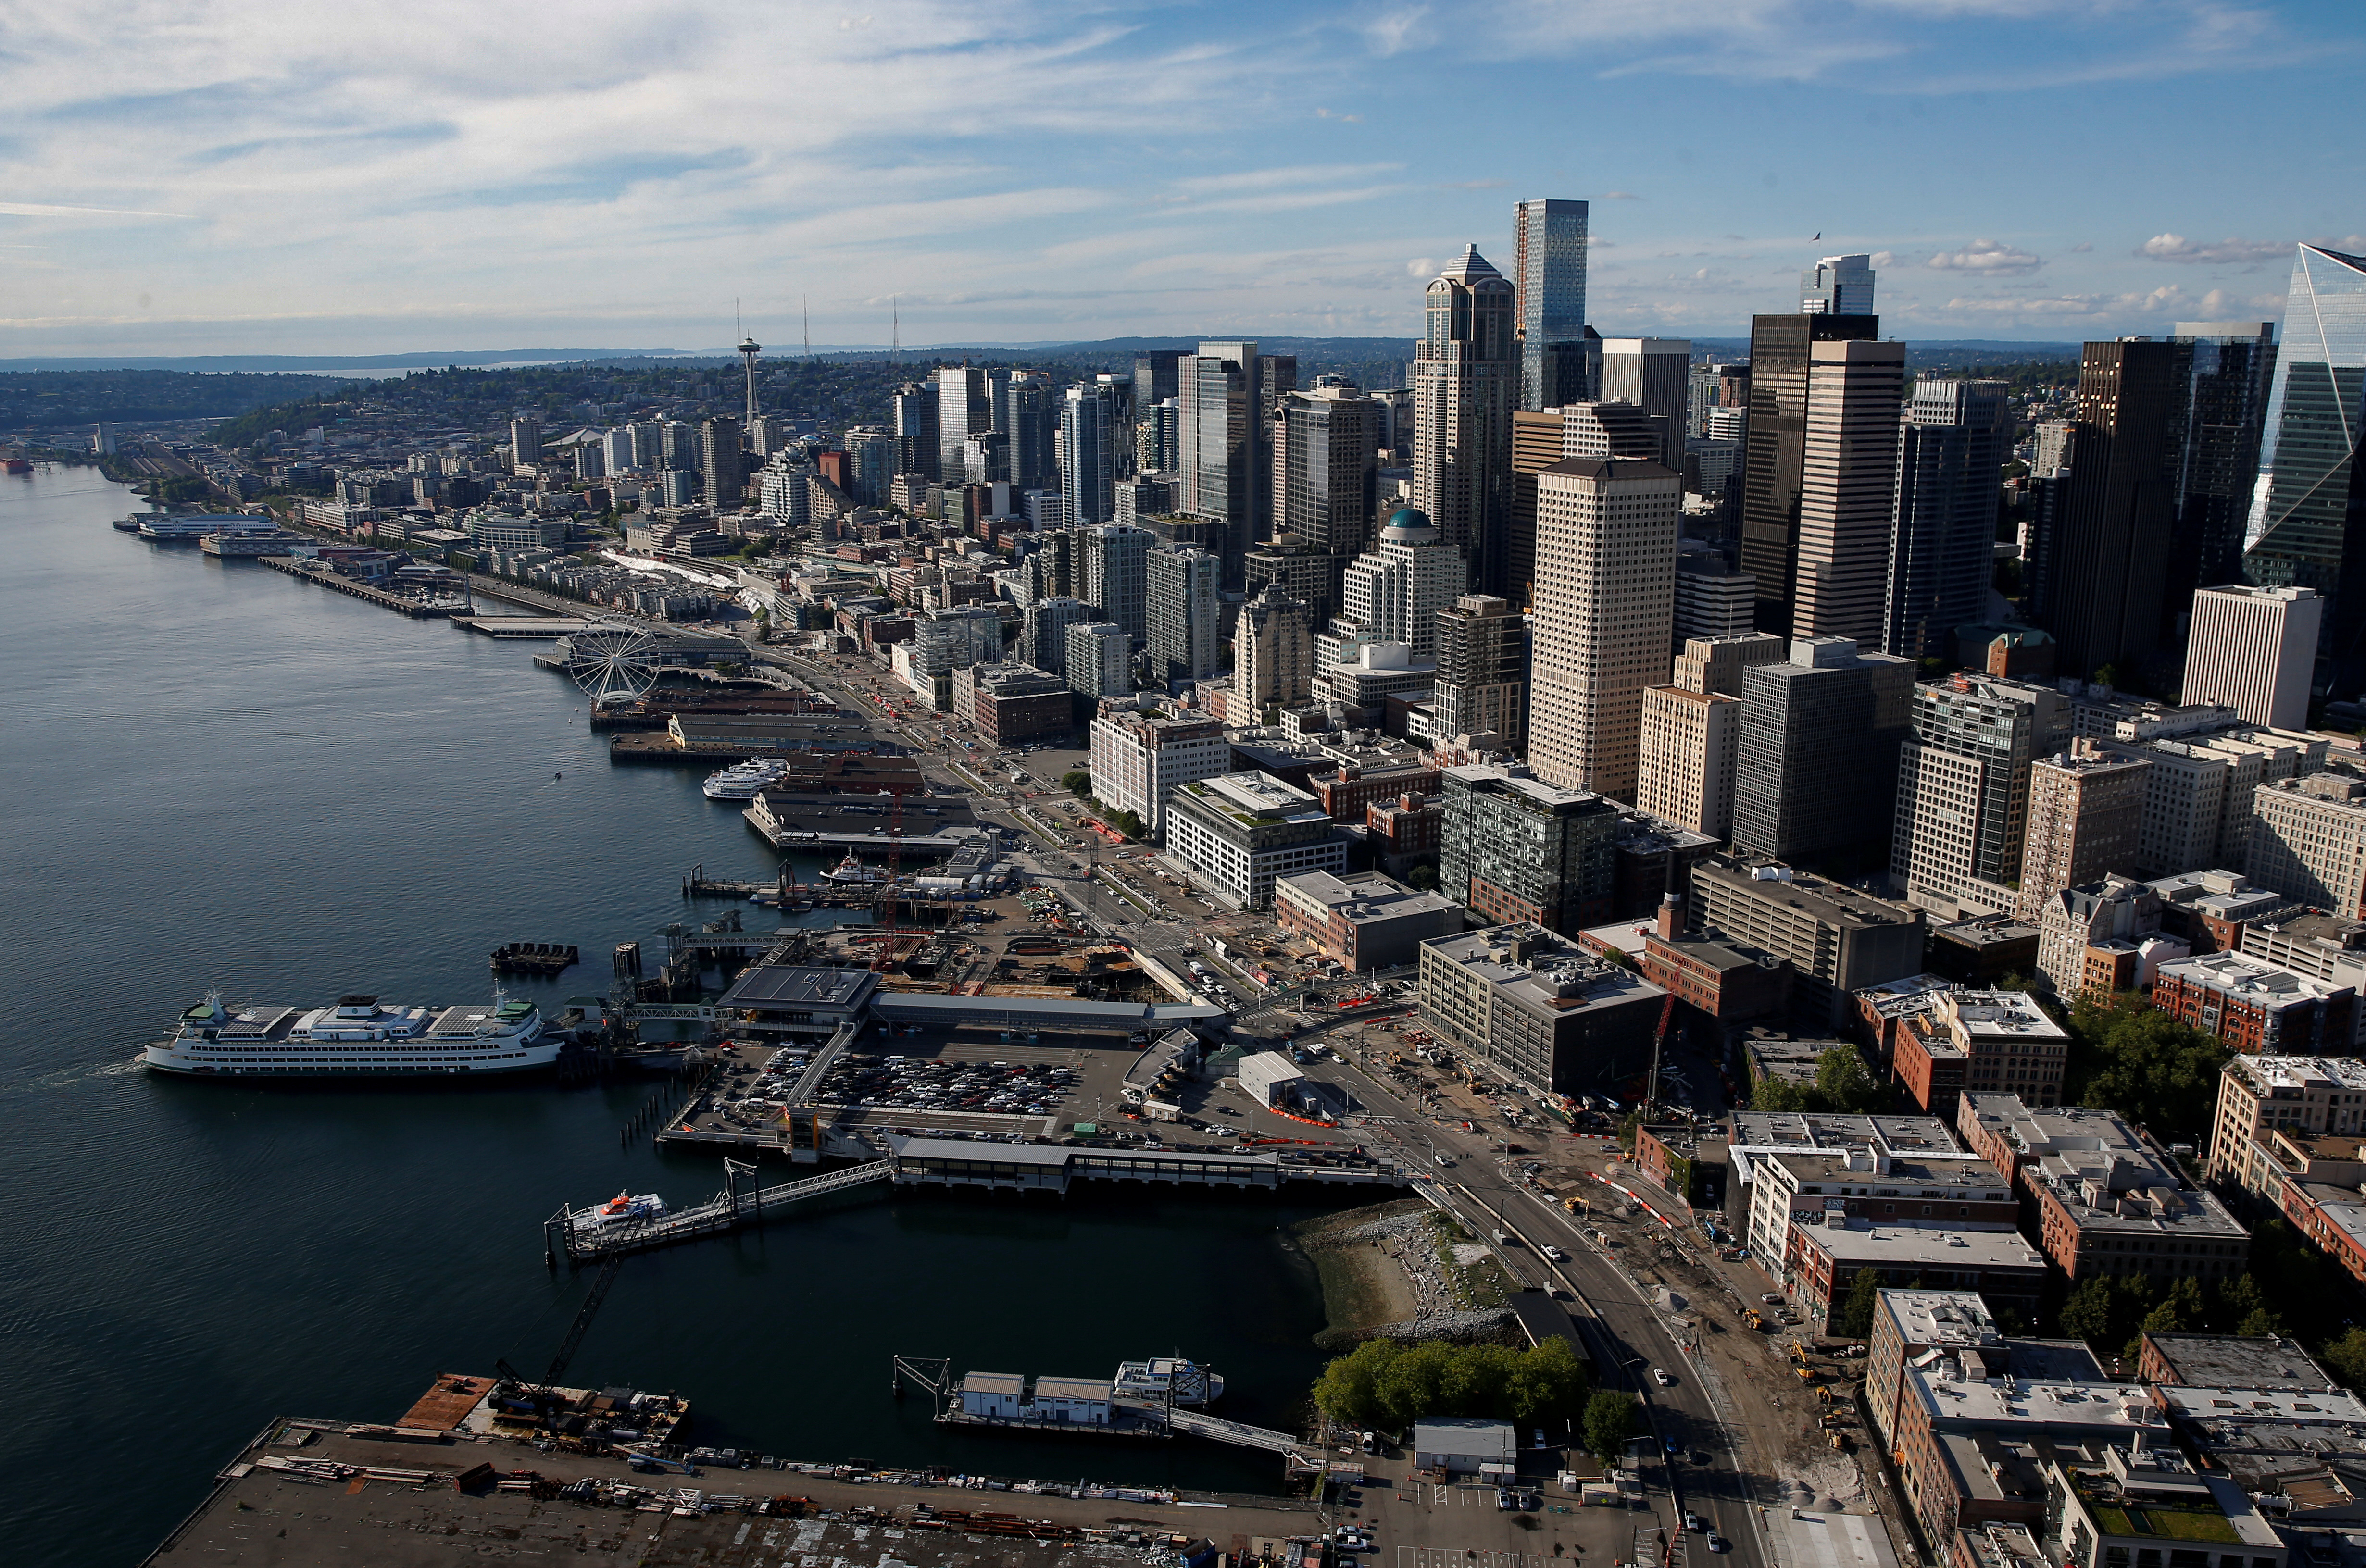 Downtown Seattle is seen in this aerial photo taken over Seattle